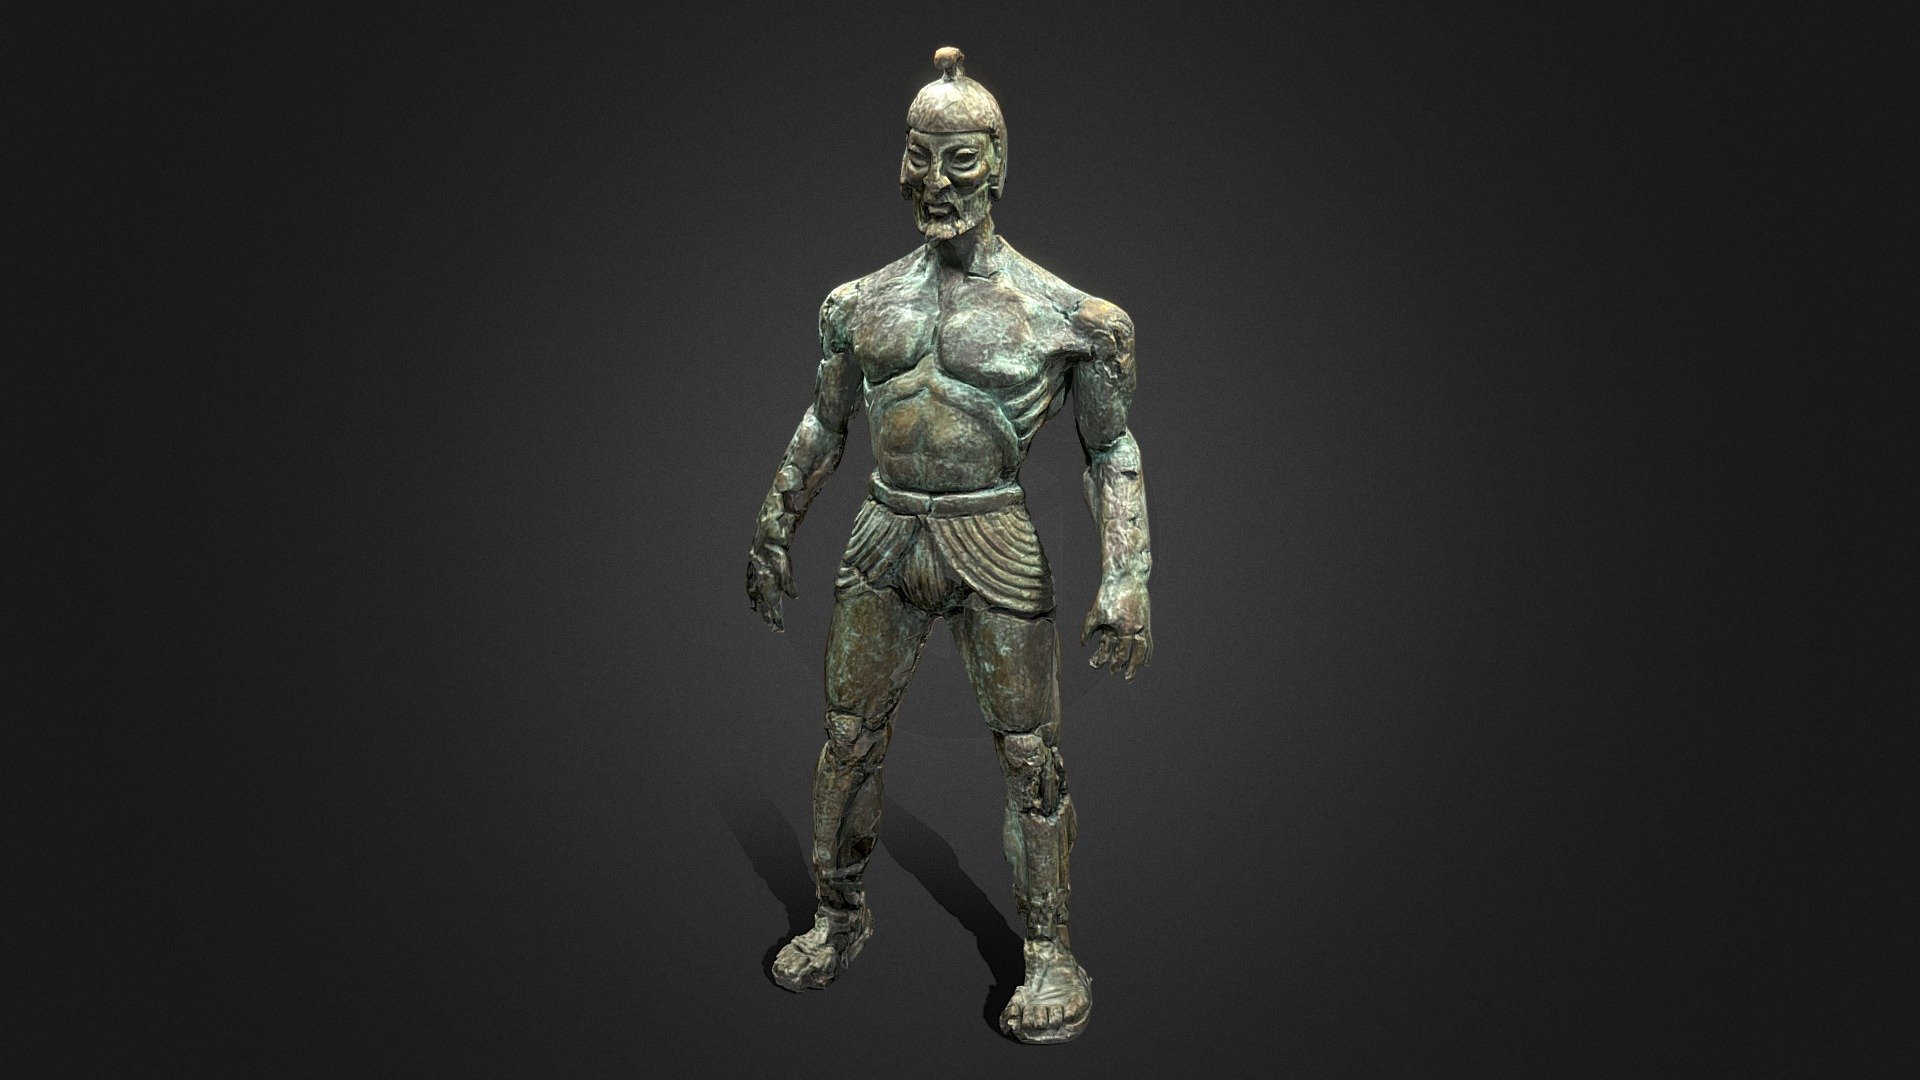 3D scan of a genine bronze staue of Talos from Jason and the Argonauts. 

Scan was done using an Artec Space Spider in 5mins.
Scan was processed in Artec Studios 18 in 10mins
Scan has a photoreal texturing made from using the Artec Space Spider tetxure and photo taken on an IPhone. These were textured mapped in Artec Studios 18. This was done in 30mins 3d model